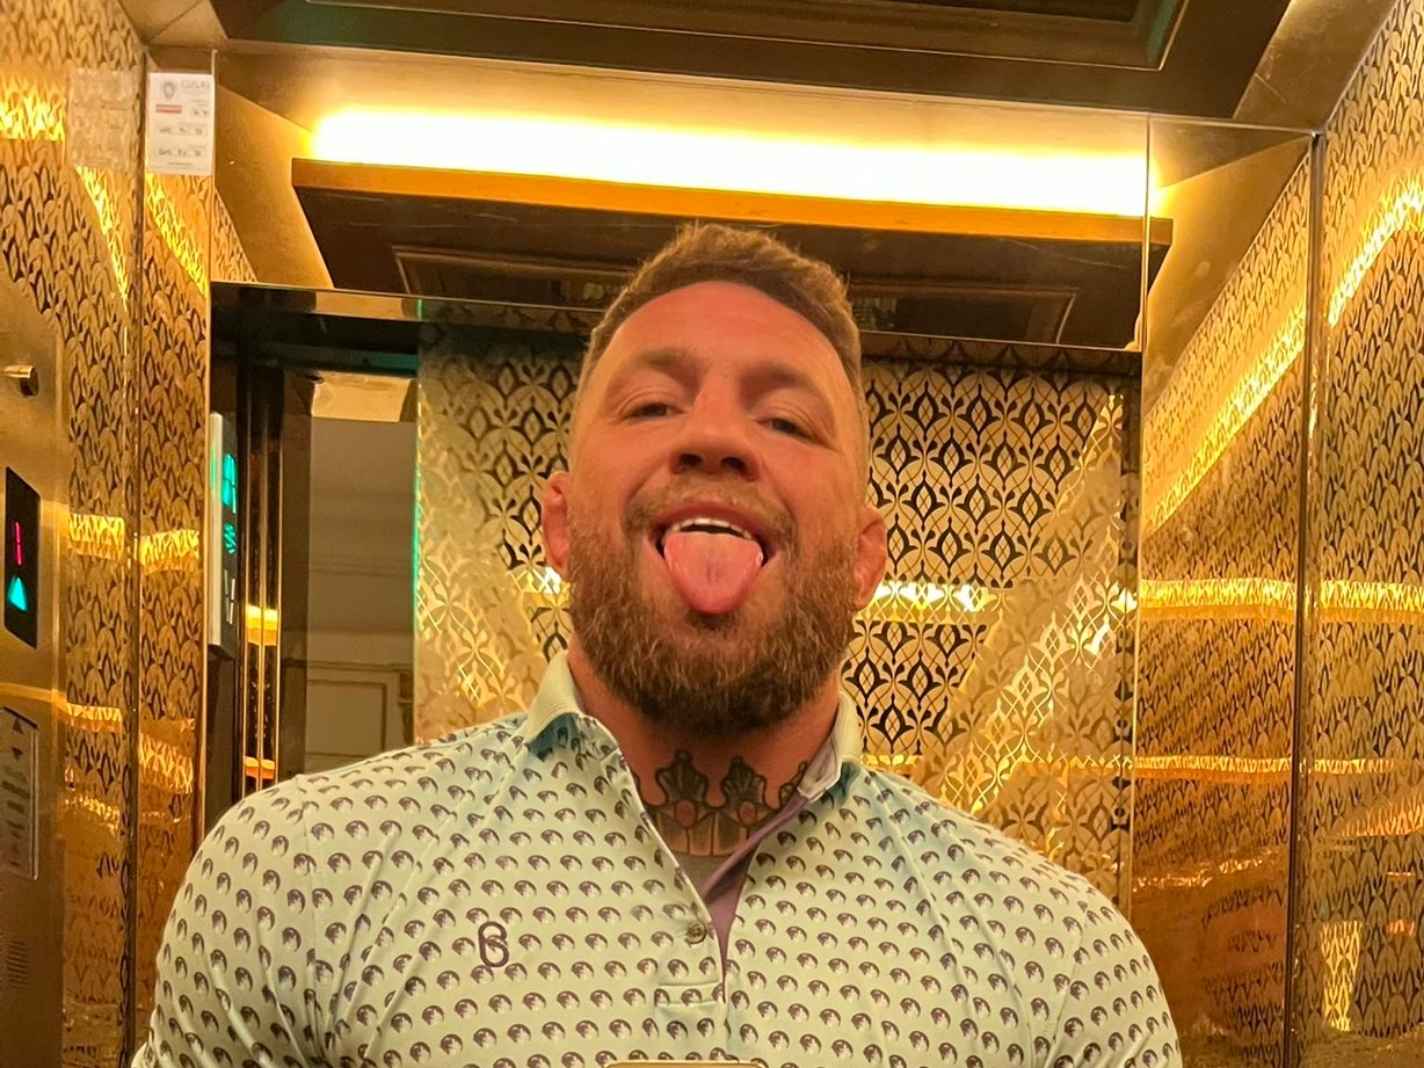 3 tweets by Conor McGregor that highlight his desire to buy Chelsea